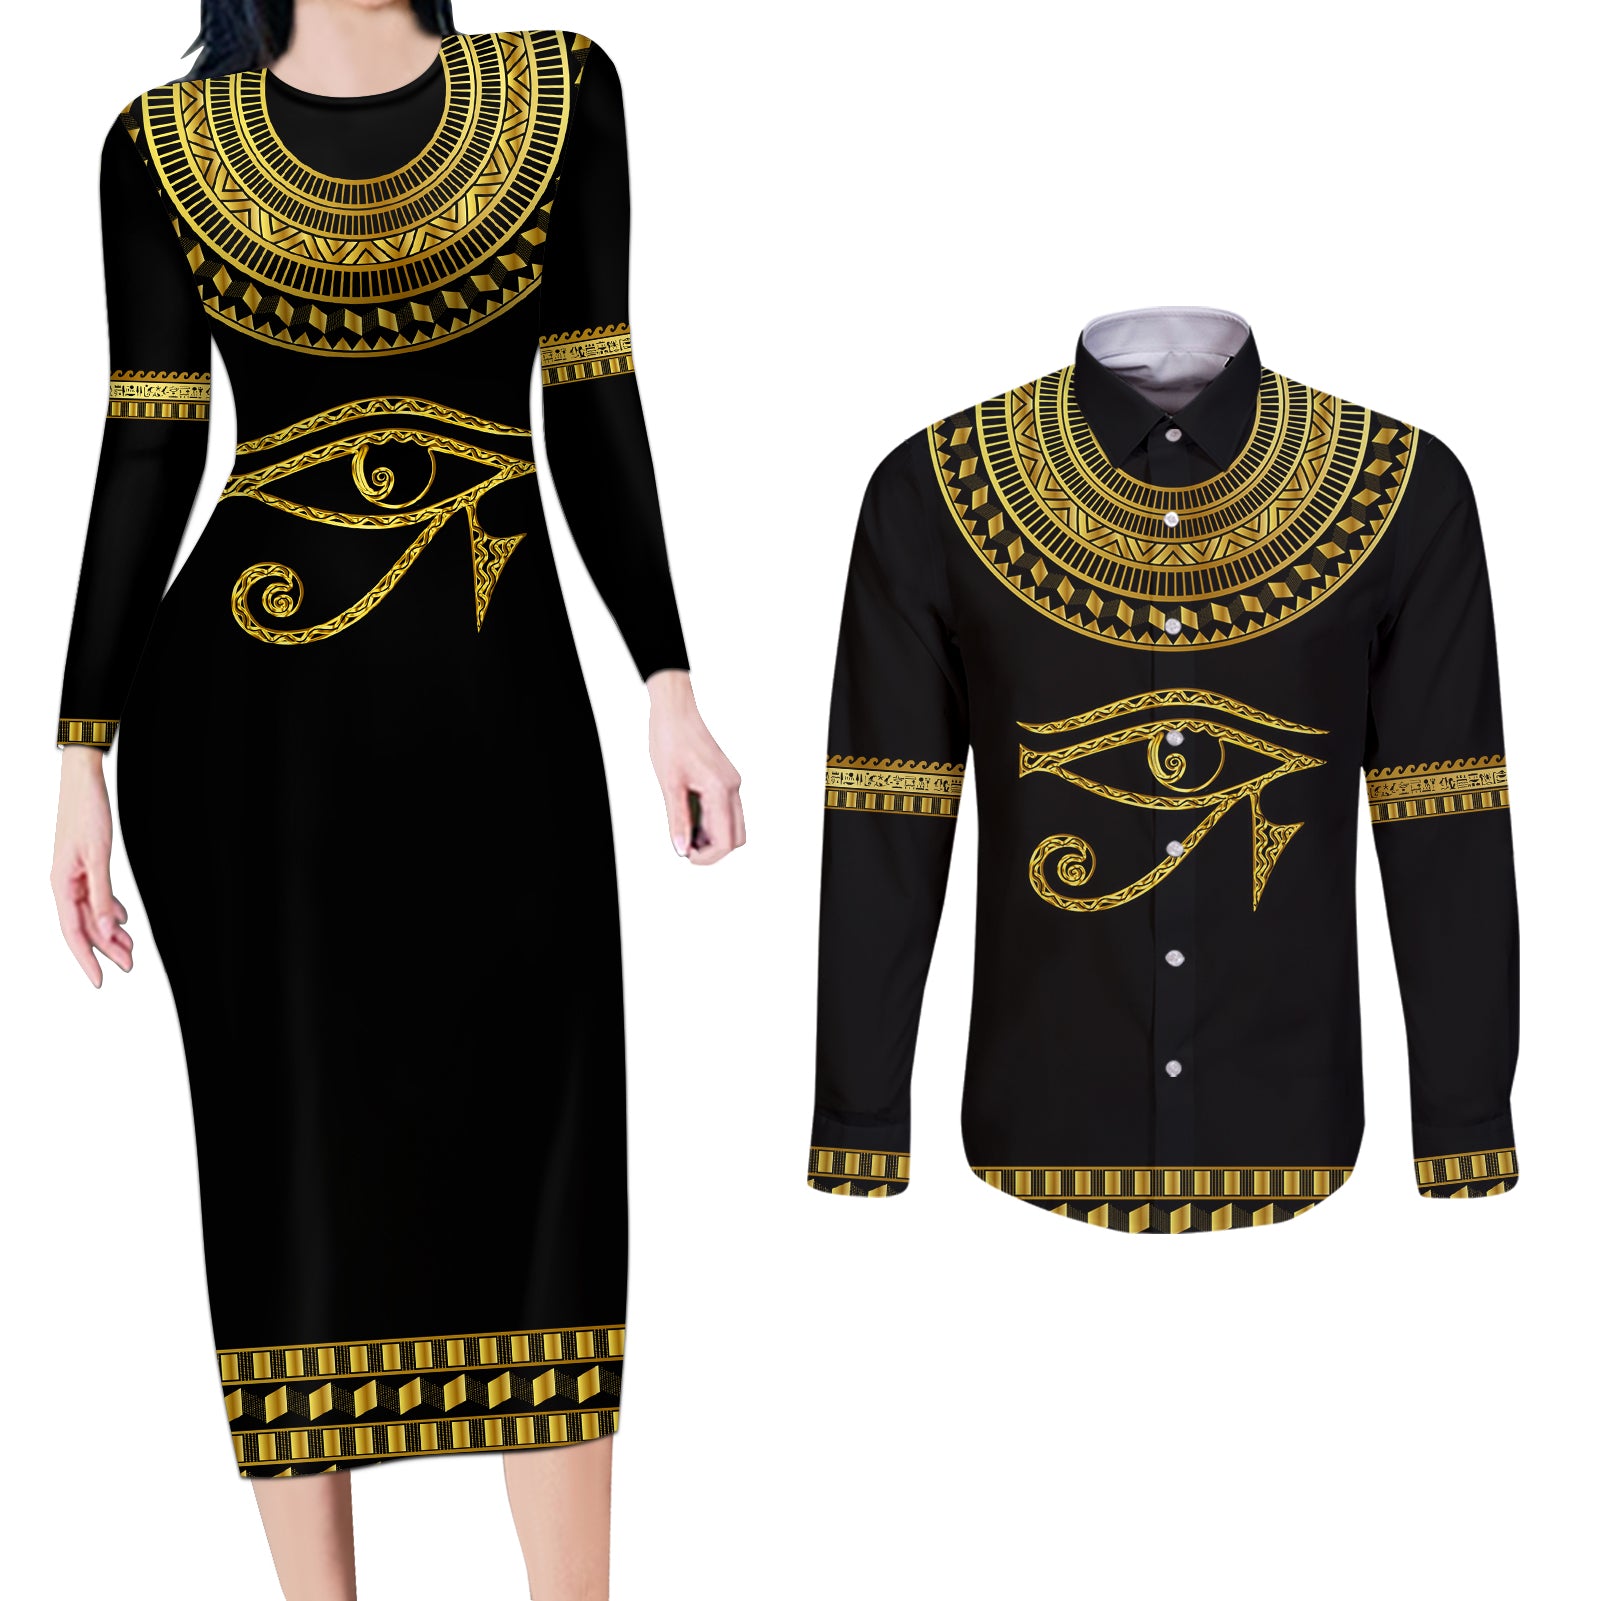 Eyes Of Horus Couples Matching Long Sleeve Bodycon Dress and Long Sleeve Button Shirt Egyptian Art